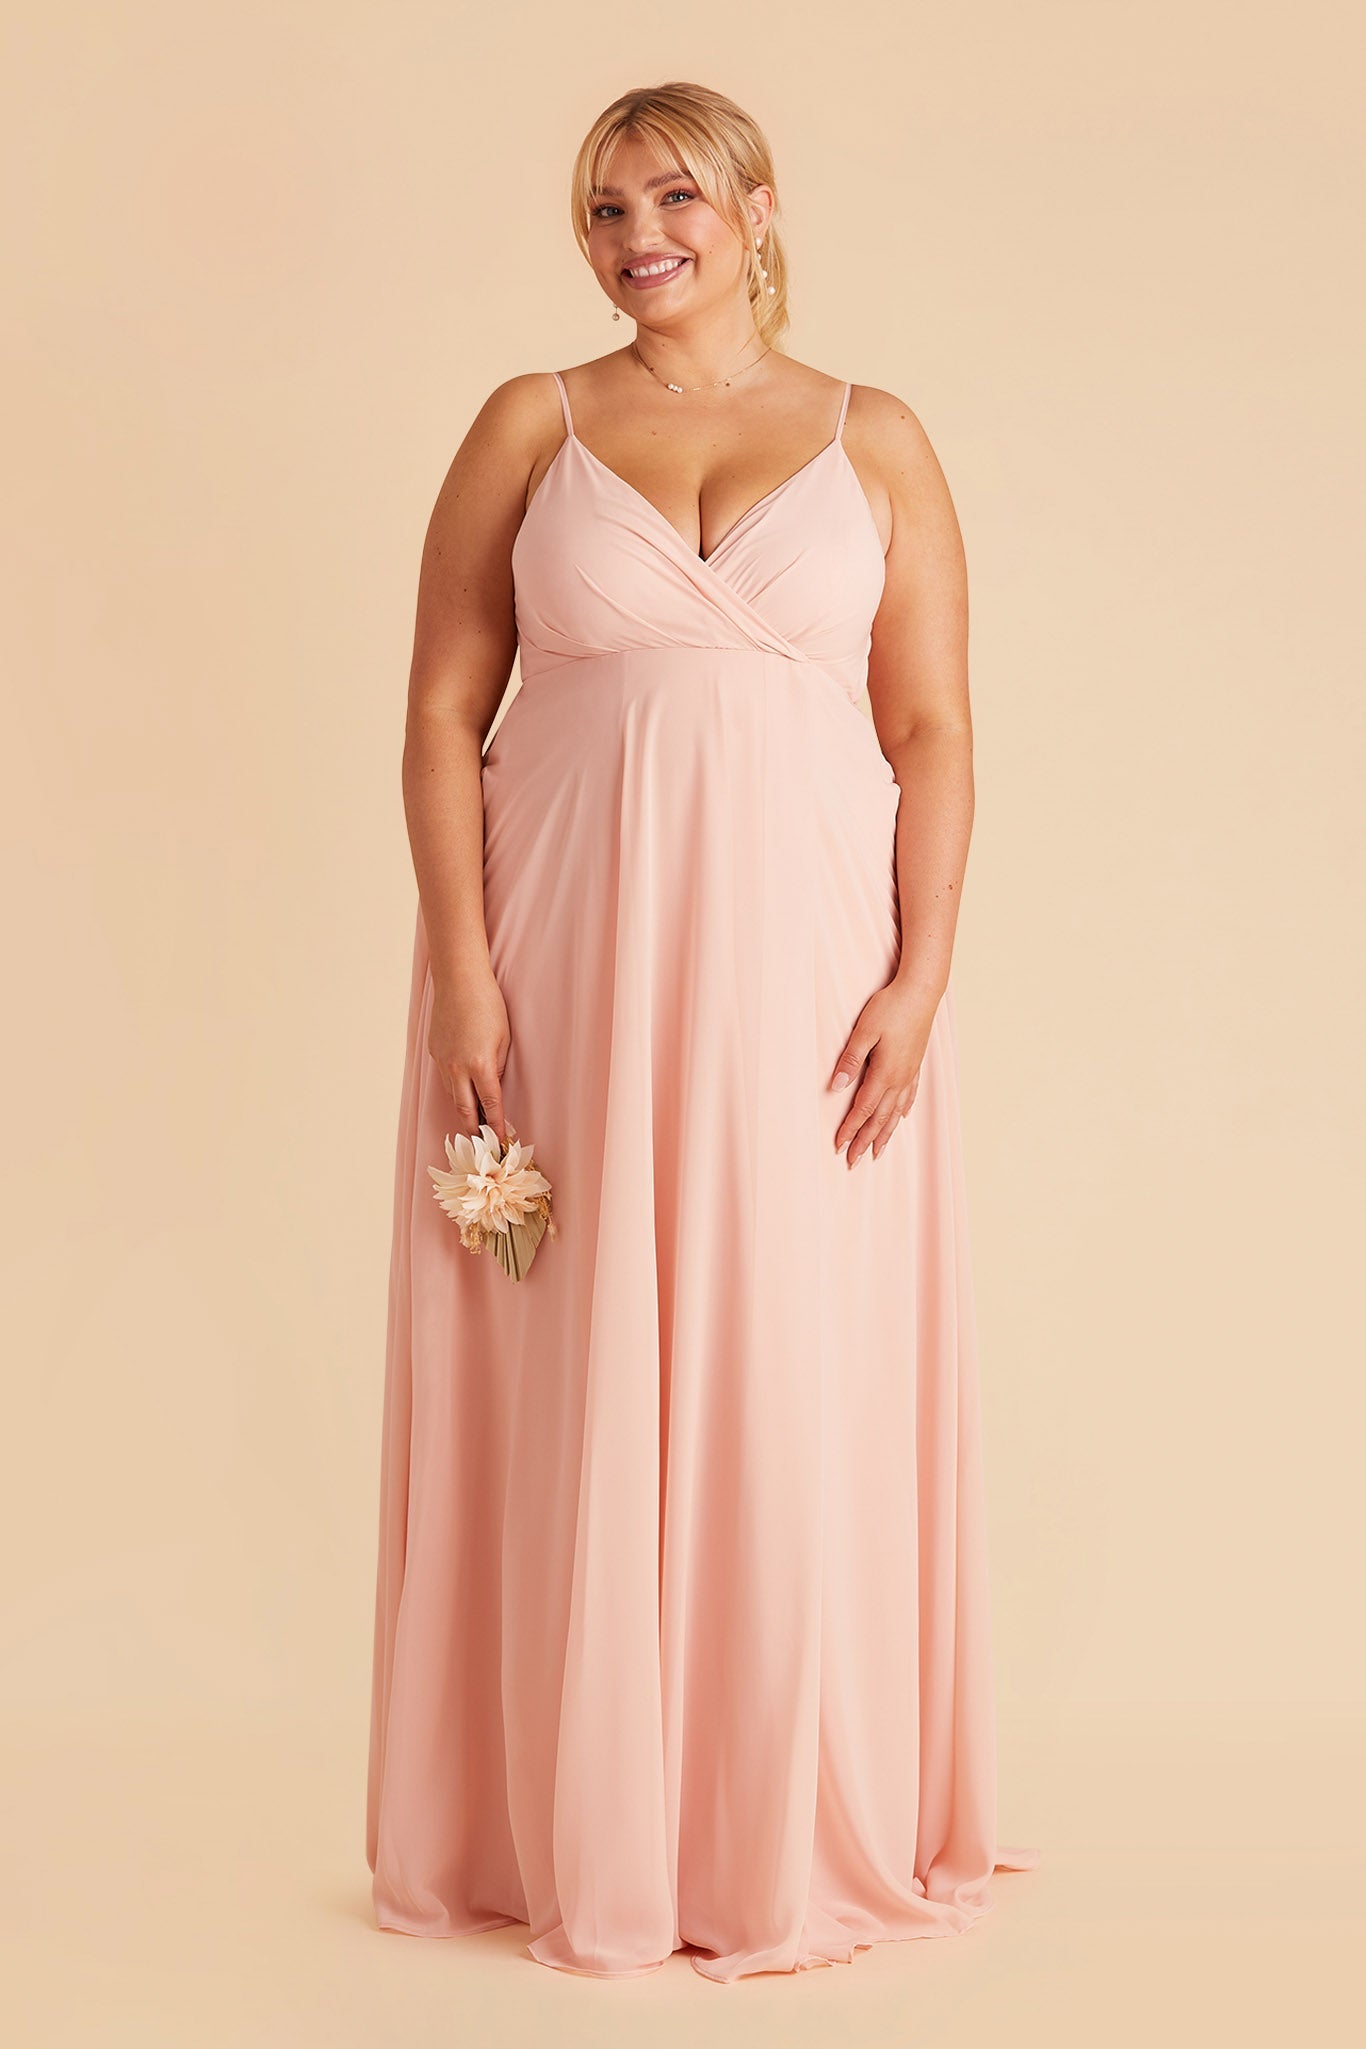 Kaia plus size bridesmaids dress in blush pink chiffon by Birdy Grey, front view